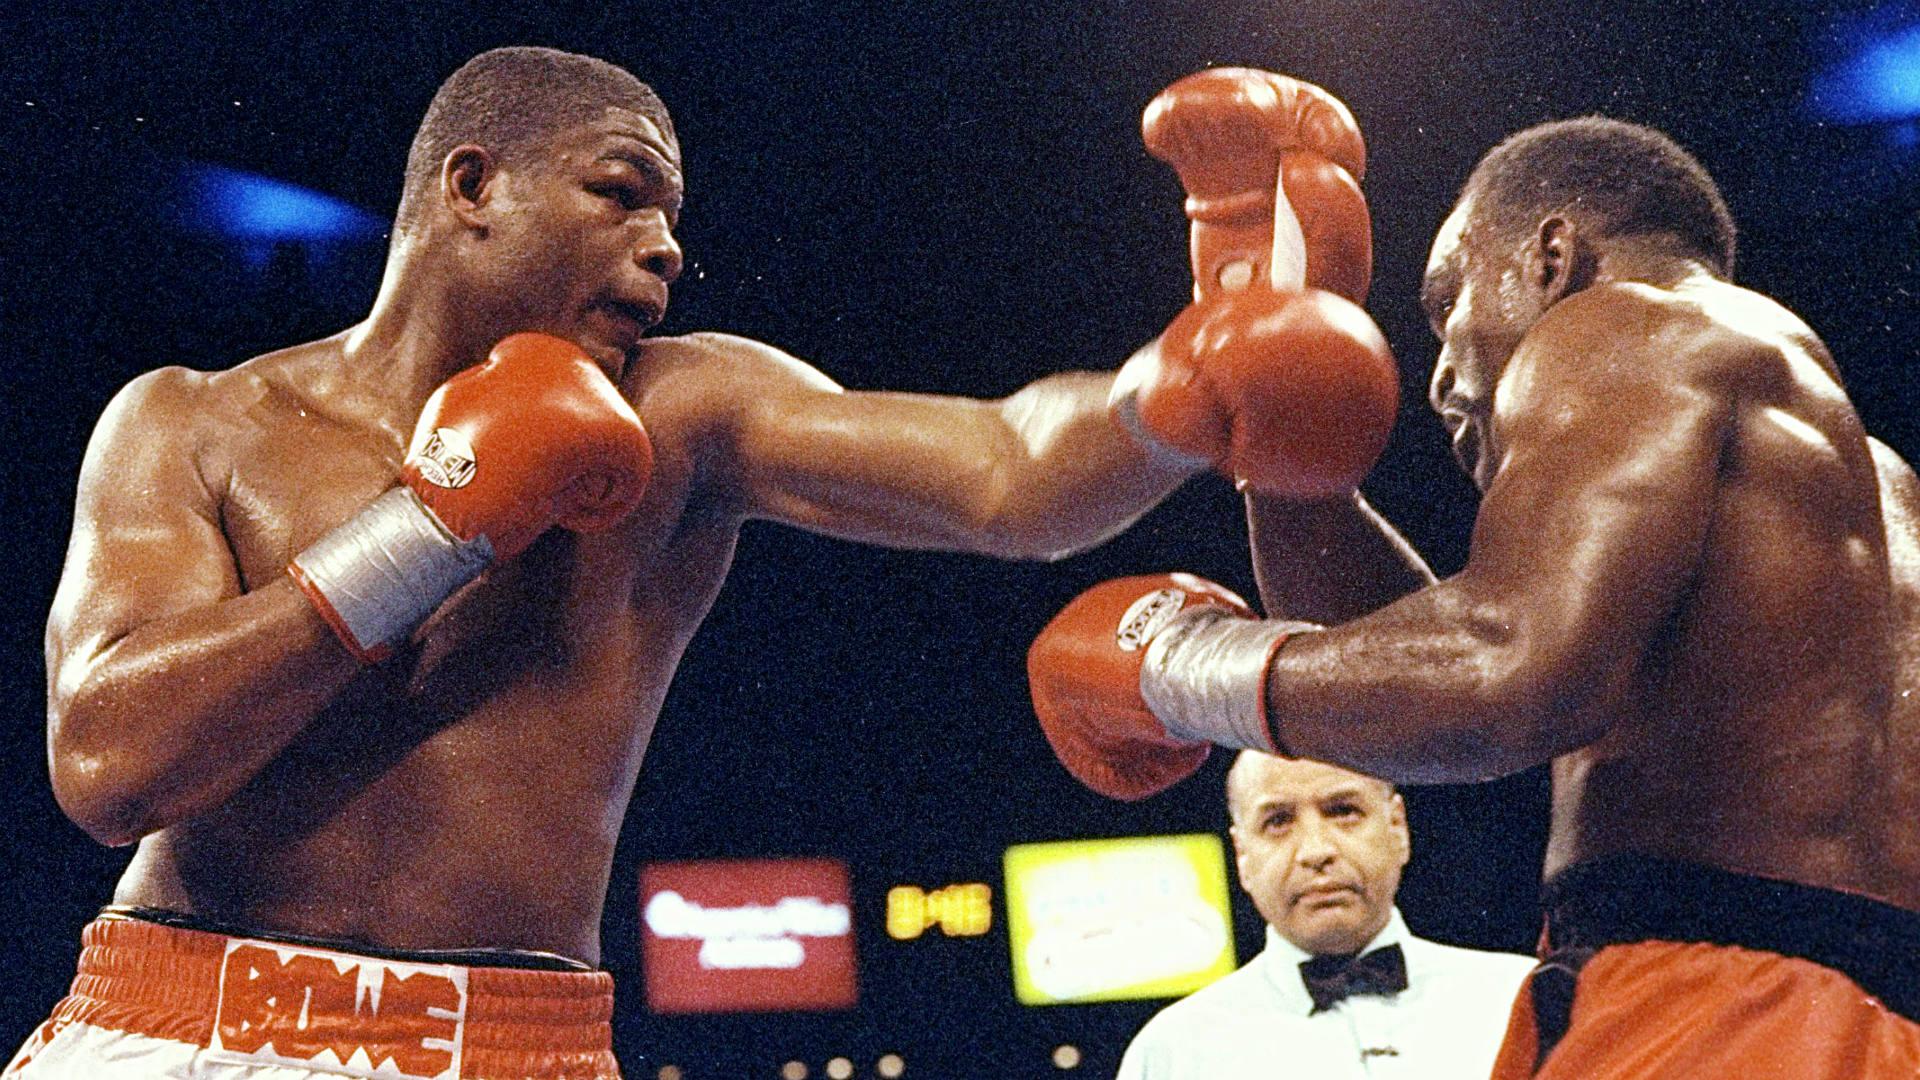 Reliving the epic fight between Evander Holyfield